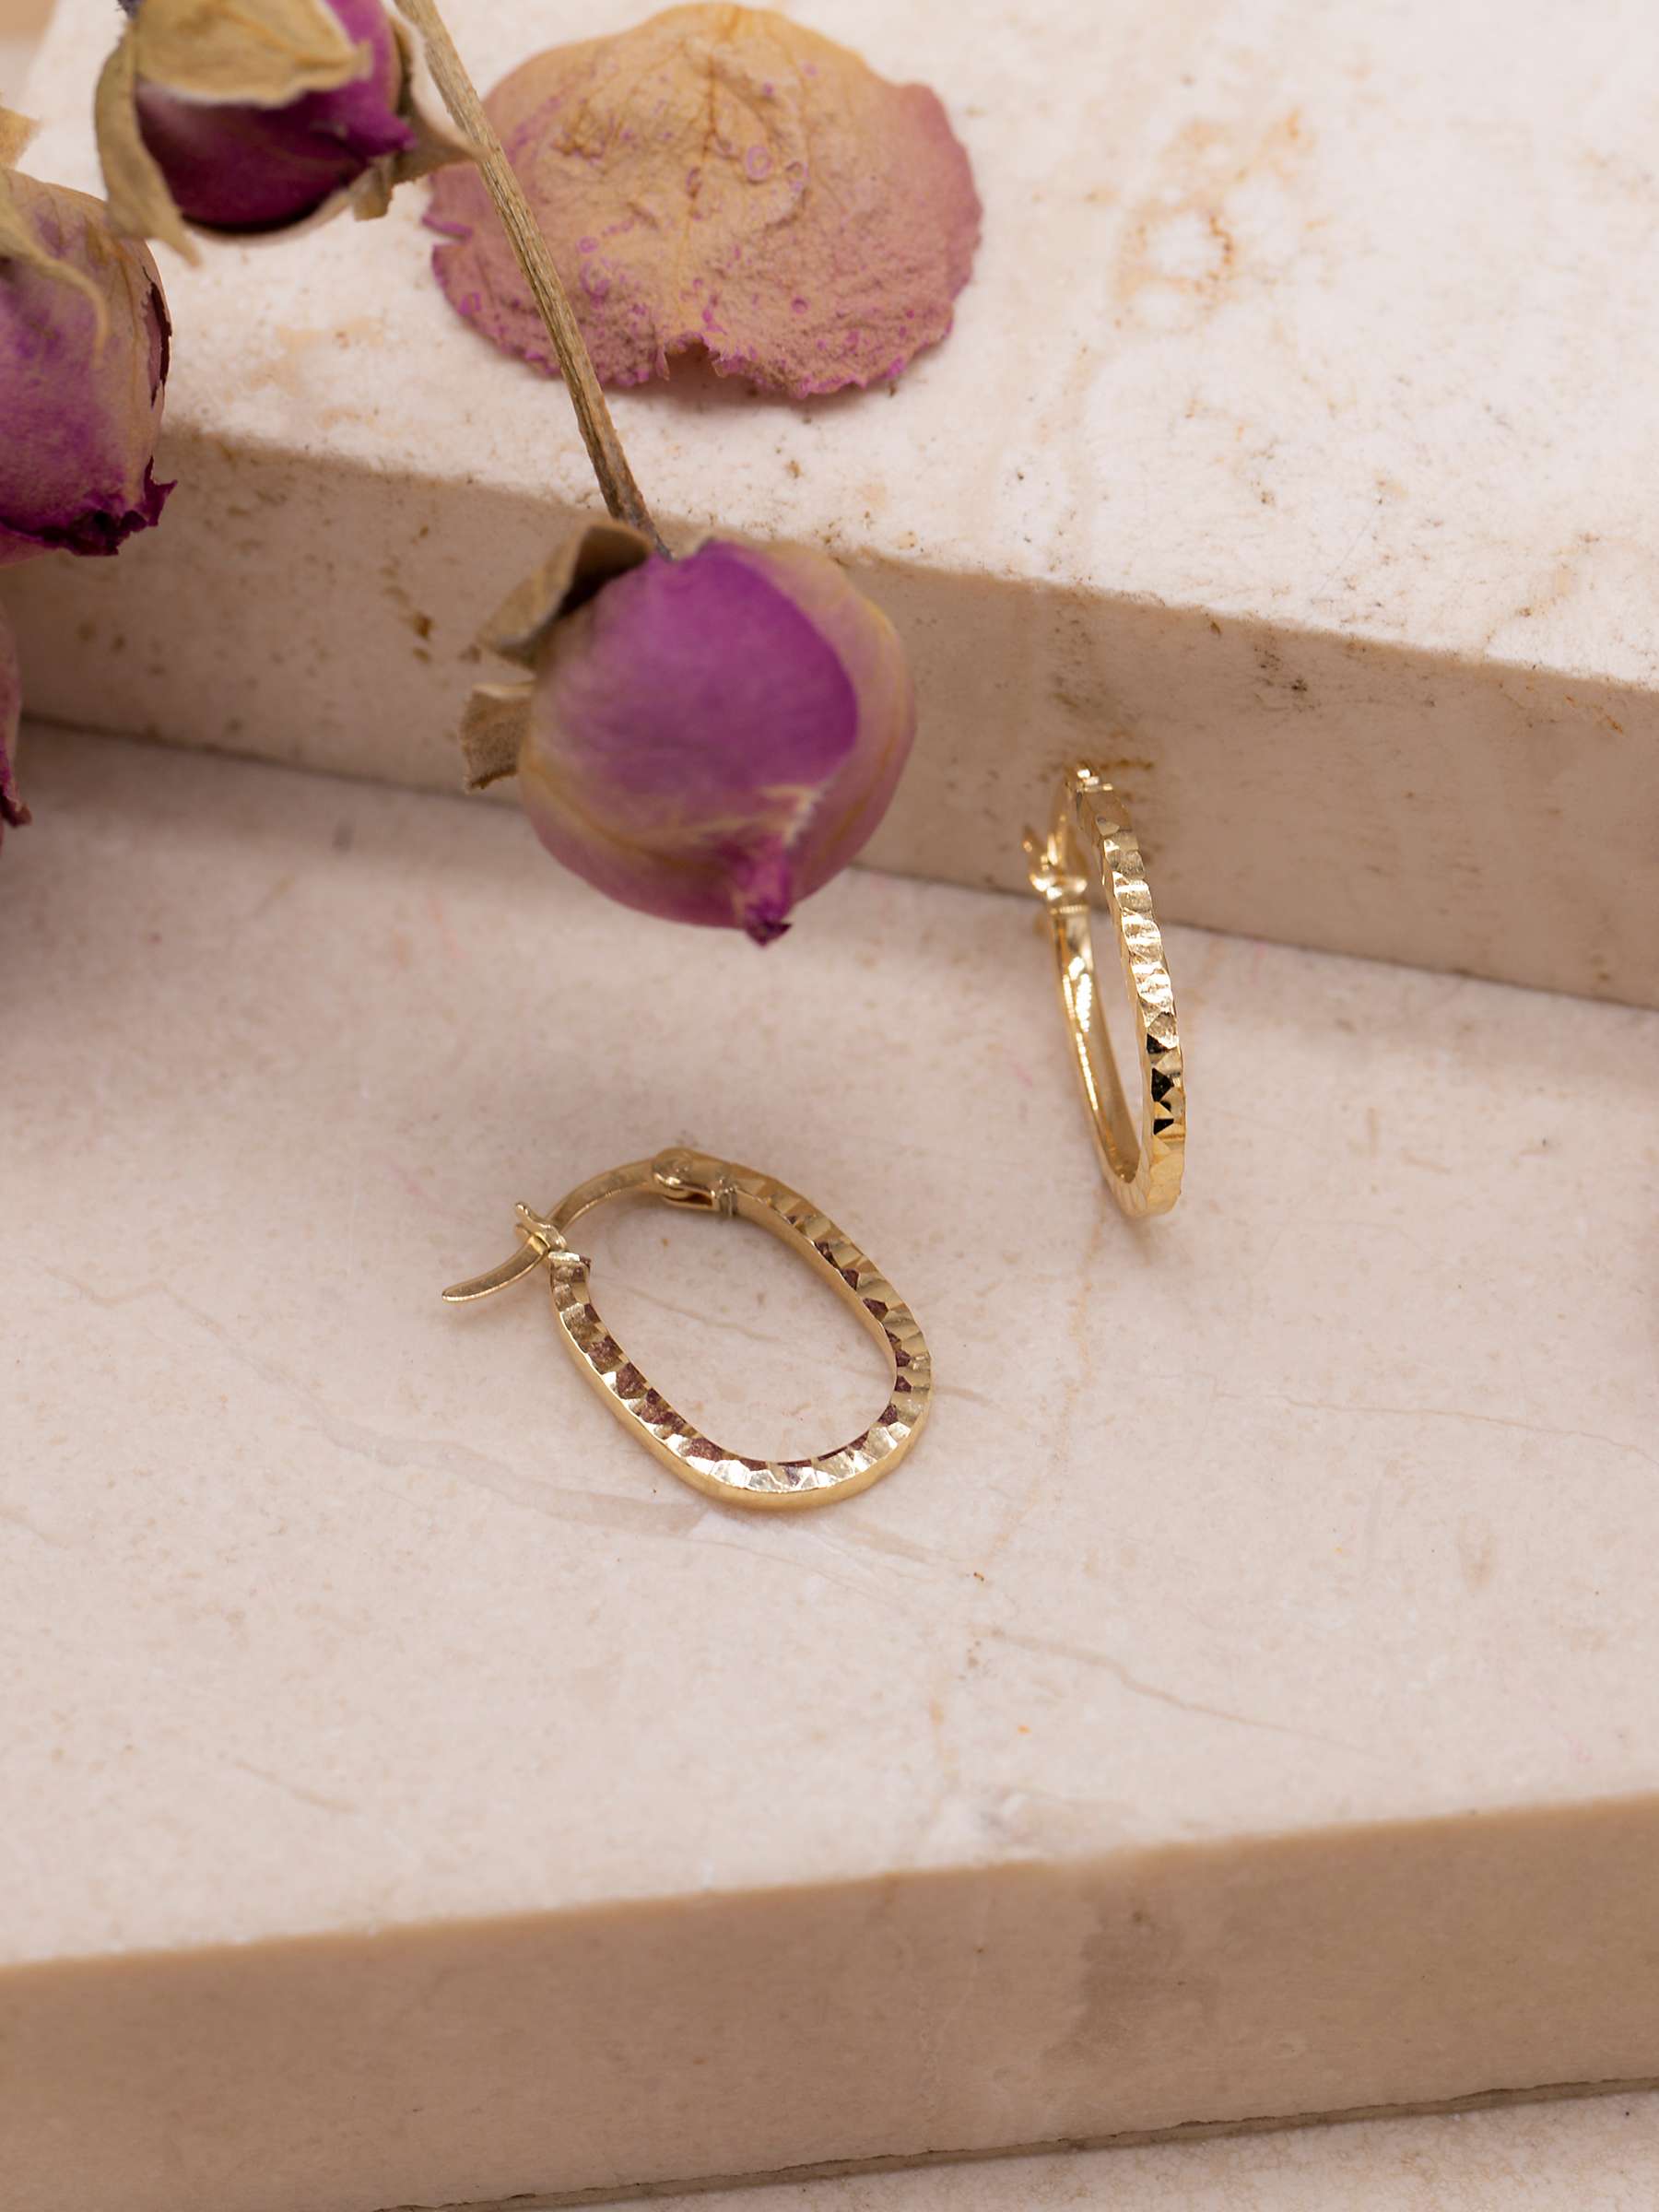 Buy IBB 9ct Small Faceted Oval Hoop Earrings, Gold Online at johnlewis.com